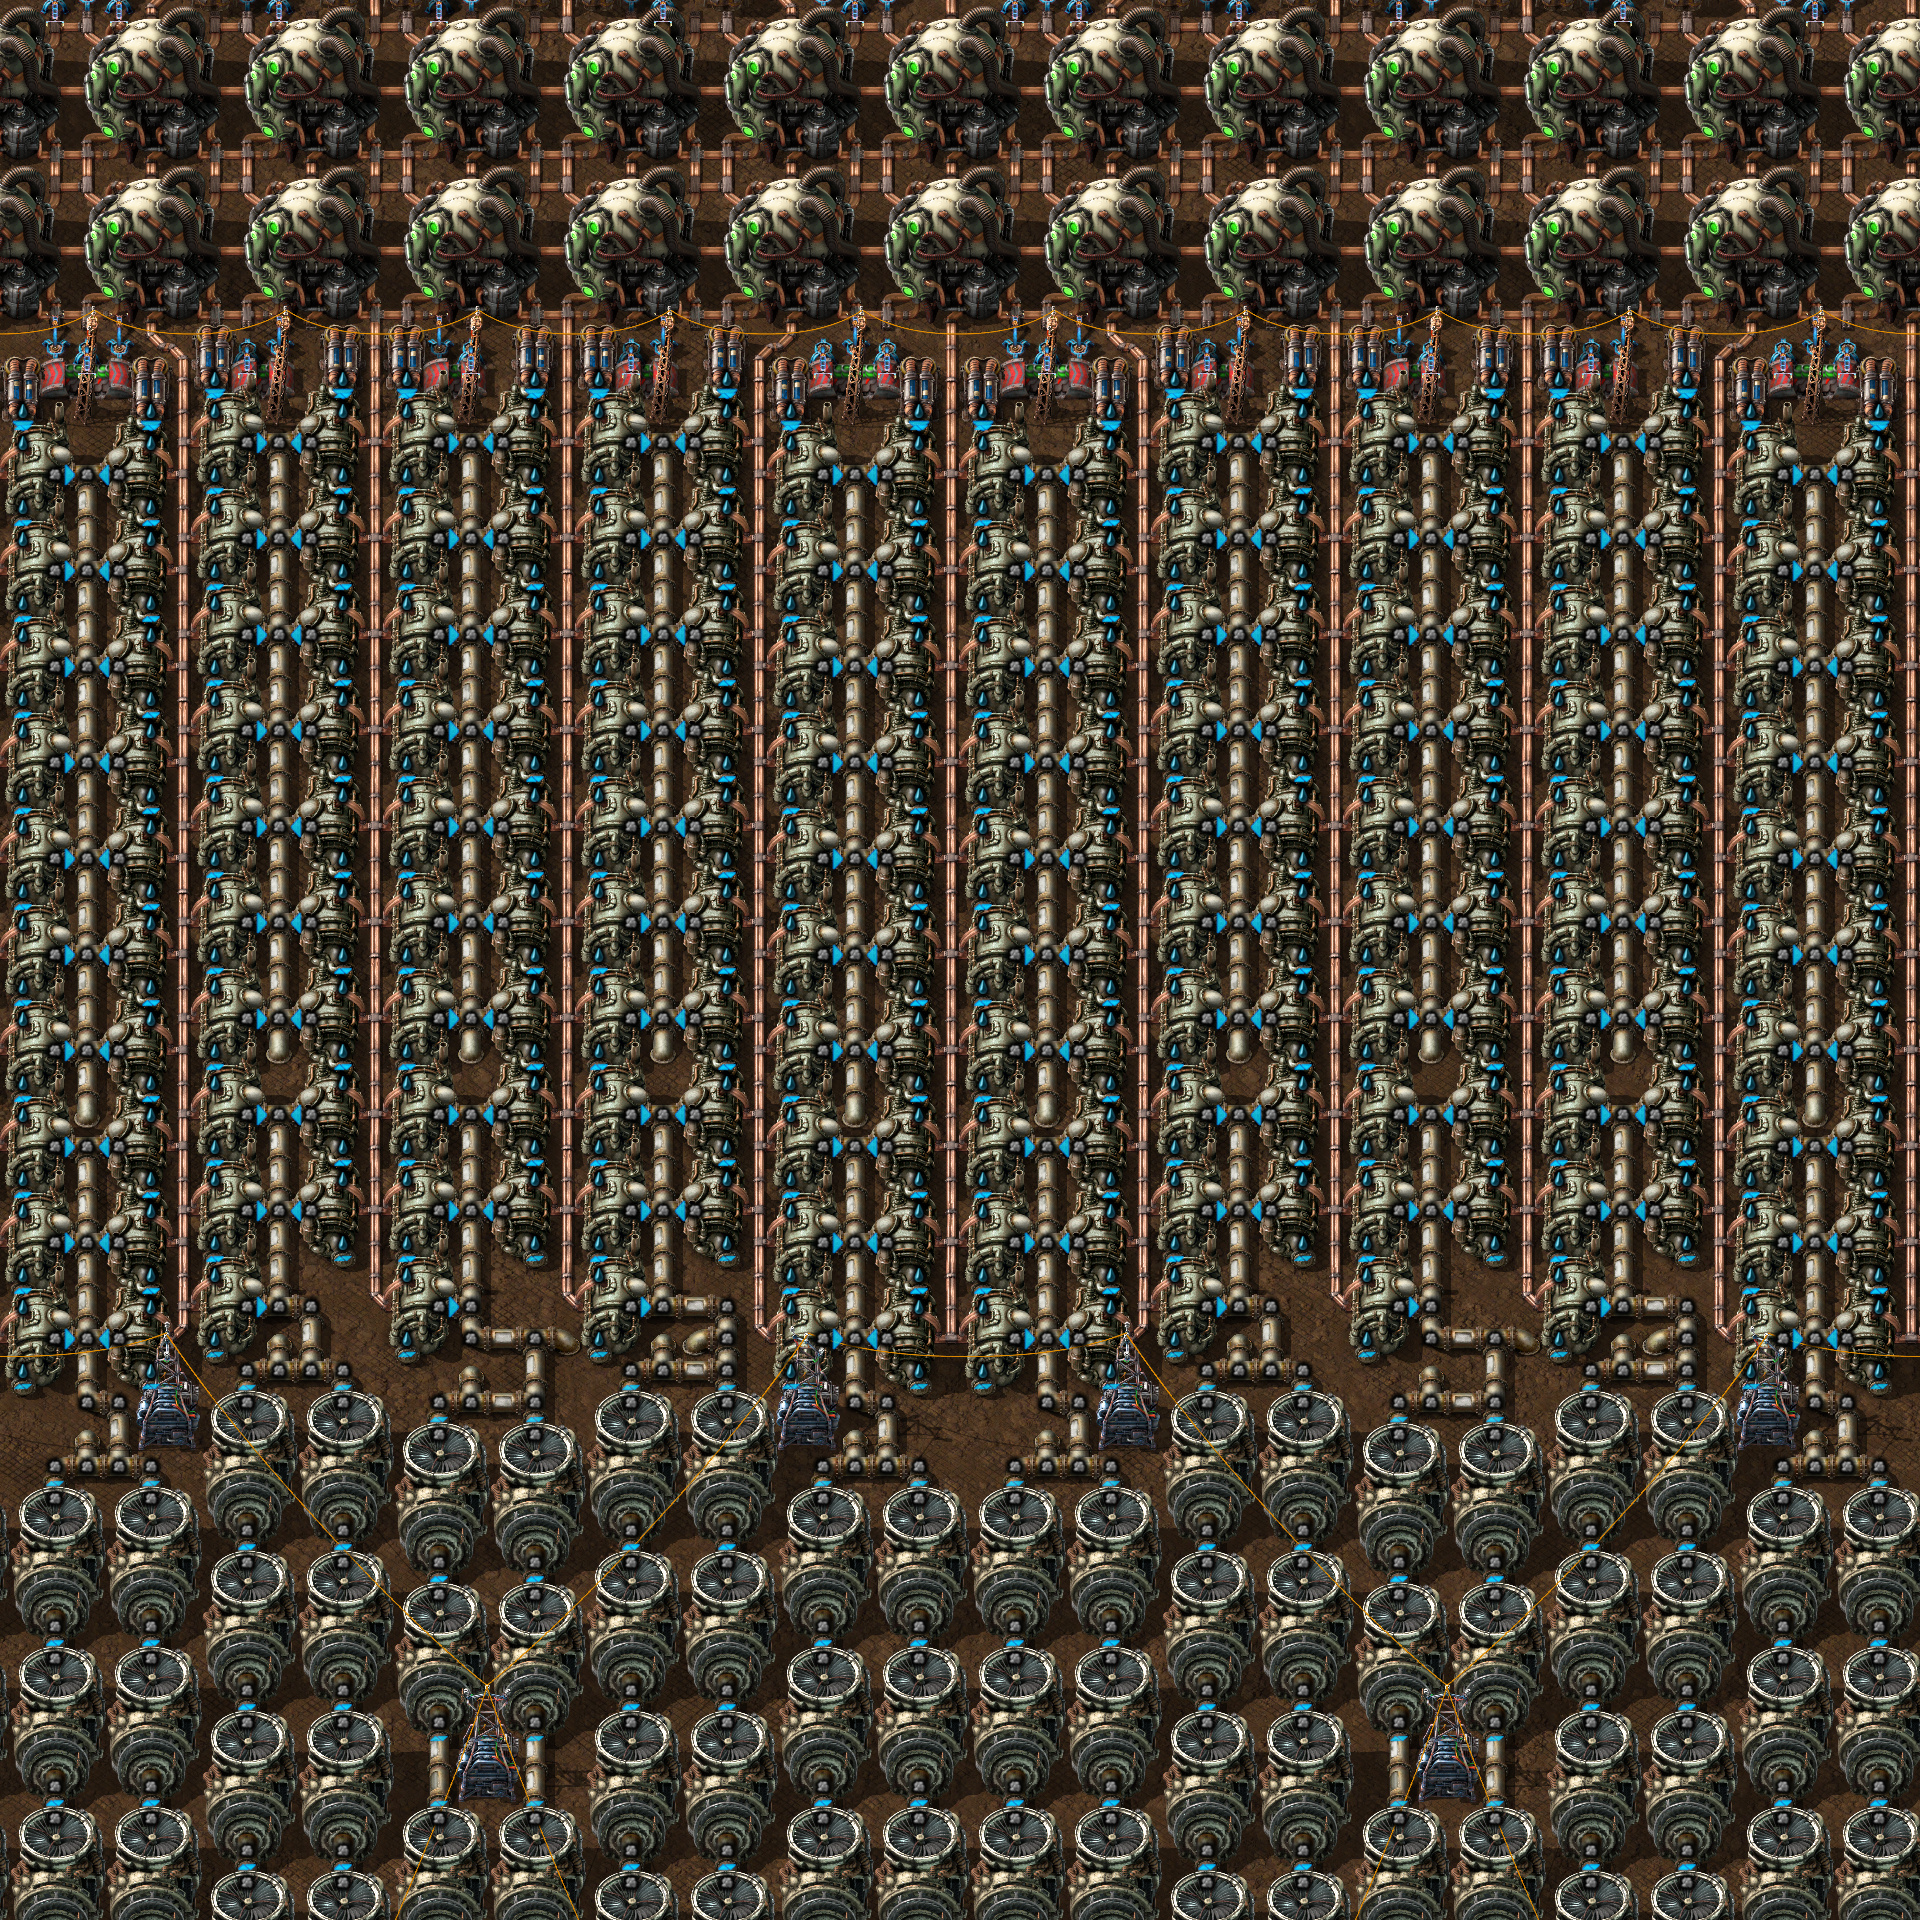 compact-nuclear-heat-exchangers.jpg